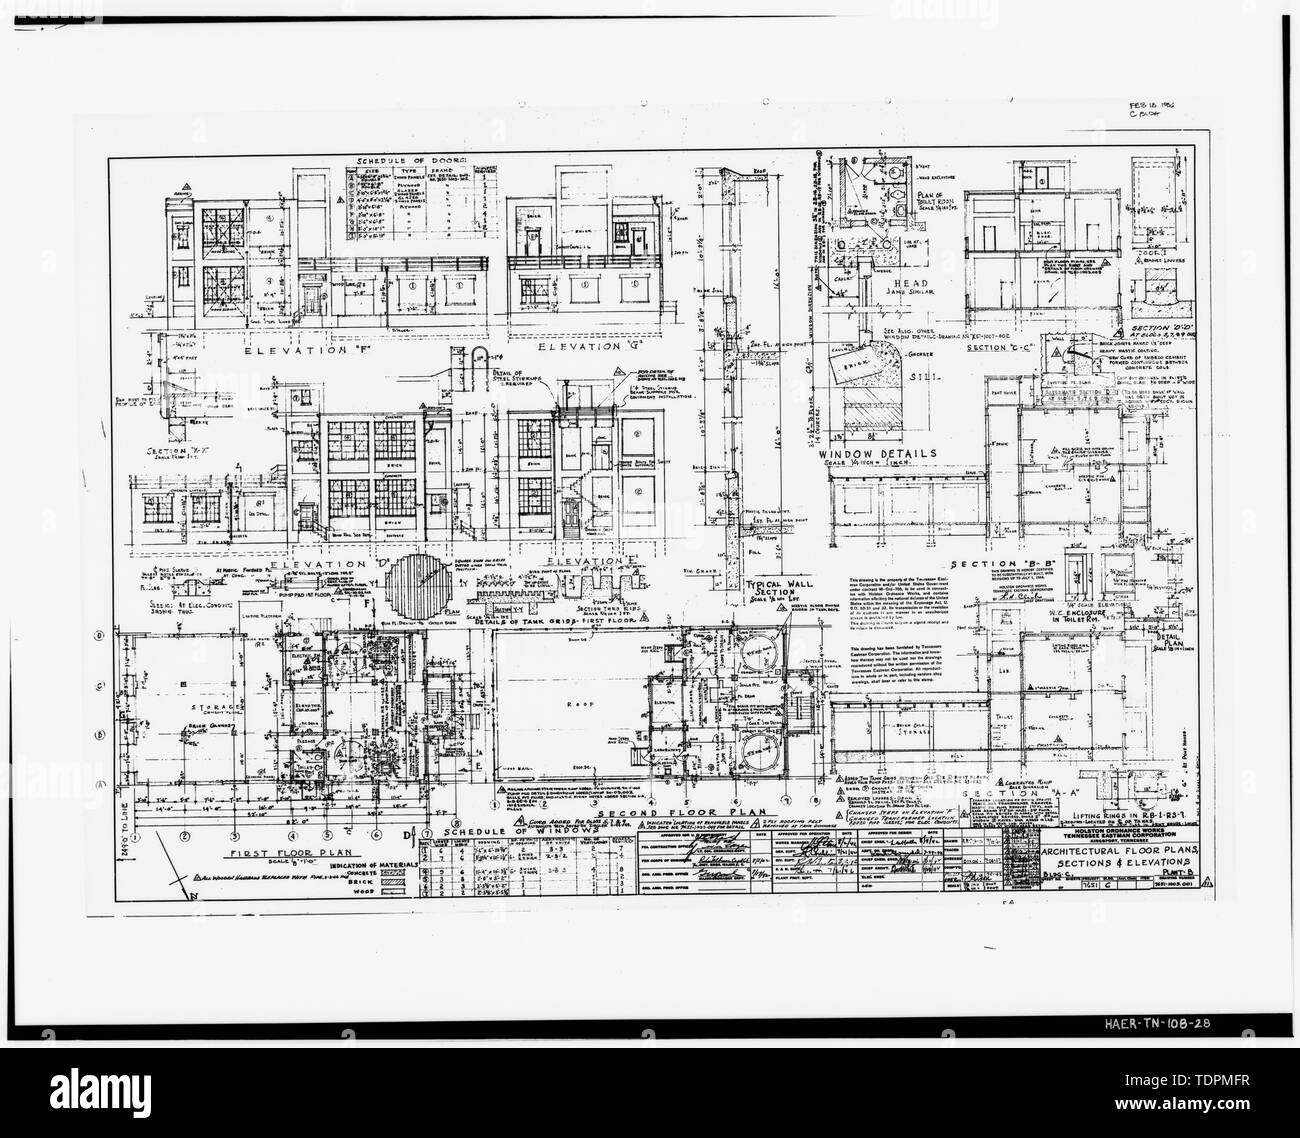 Photograph of a line drawing. 'ARCHITECTURAL FLOOR PLANS, SECTIONS and ELEVATIONS, BUILDING C, PLANT B.' Holston Ordnance Works, Tennessee Eastman Corporation. July 7, 1942. Delineator- F. F. Stone. Drawing - 7651-1003.001. - Holston Army Ammunition Plant, RDX-and-Composition-B Manufacturing Line 9, Kingsport, Sullivan County, TN; Bachmann                              , Werner E; Tennessee Eastman Corporation; U.S. Department of the Army; National Defense Research Committee; Fraser-Brace Company; Charles T. Main Incorporated; U.S. Army Corps of Engineers; Holston Defense Corporation; Tompkins, Stock Photo